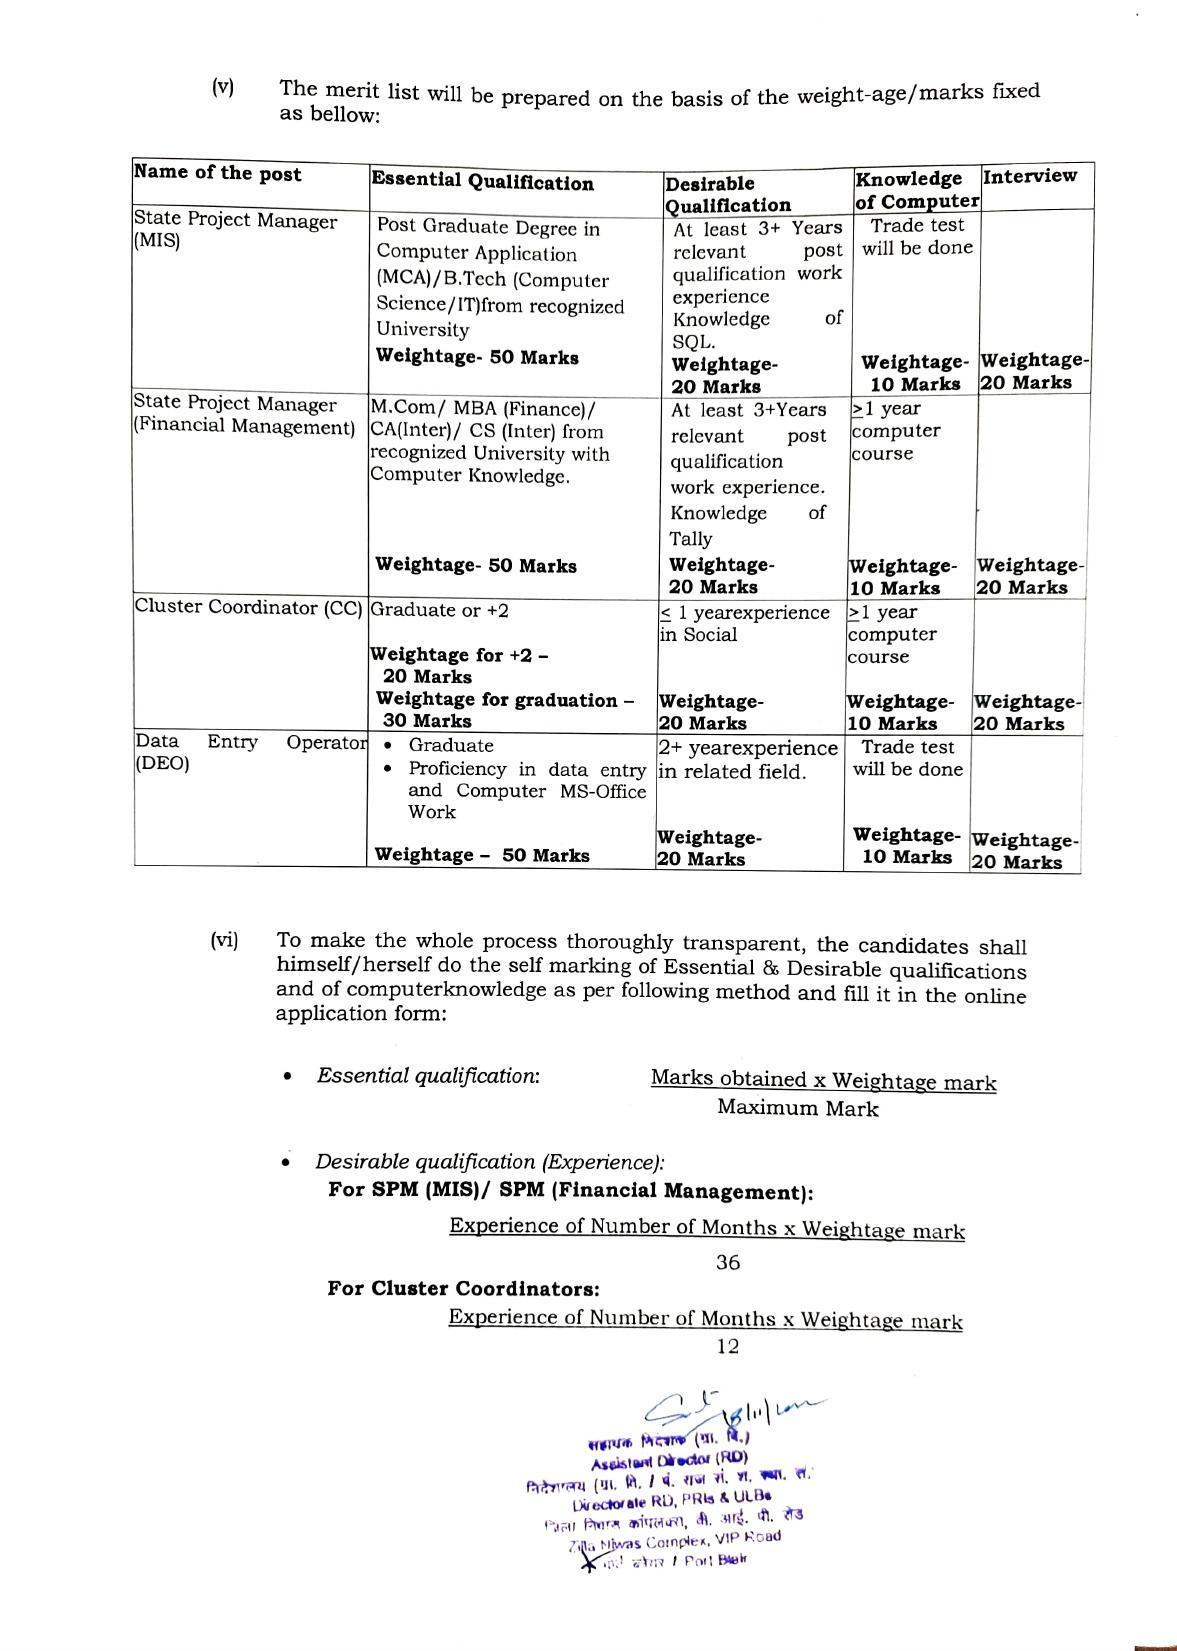 Andaman & Nicobar Administration Invites Application for 5 State Project Manager, Cluster Coordinator, More Vacancies Recruitment 2022 - Page 6